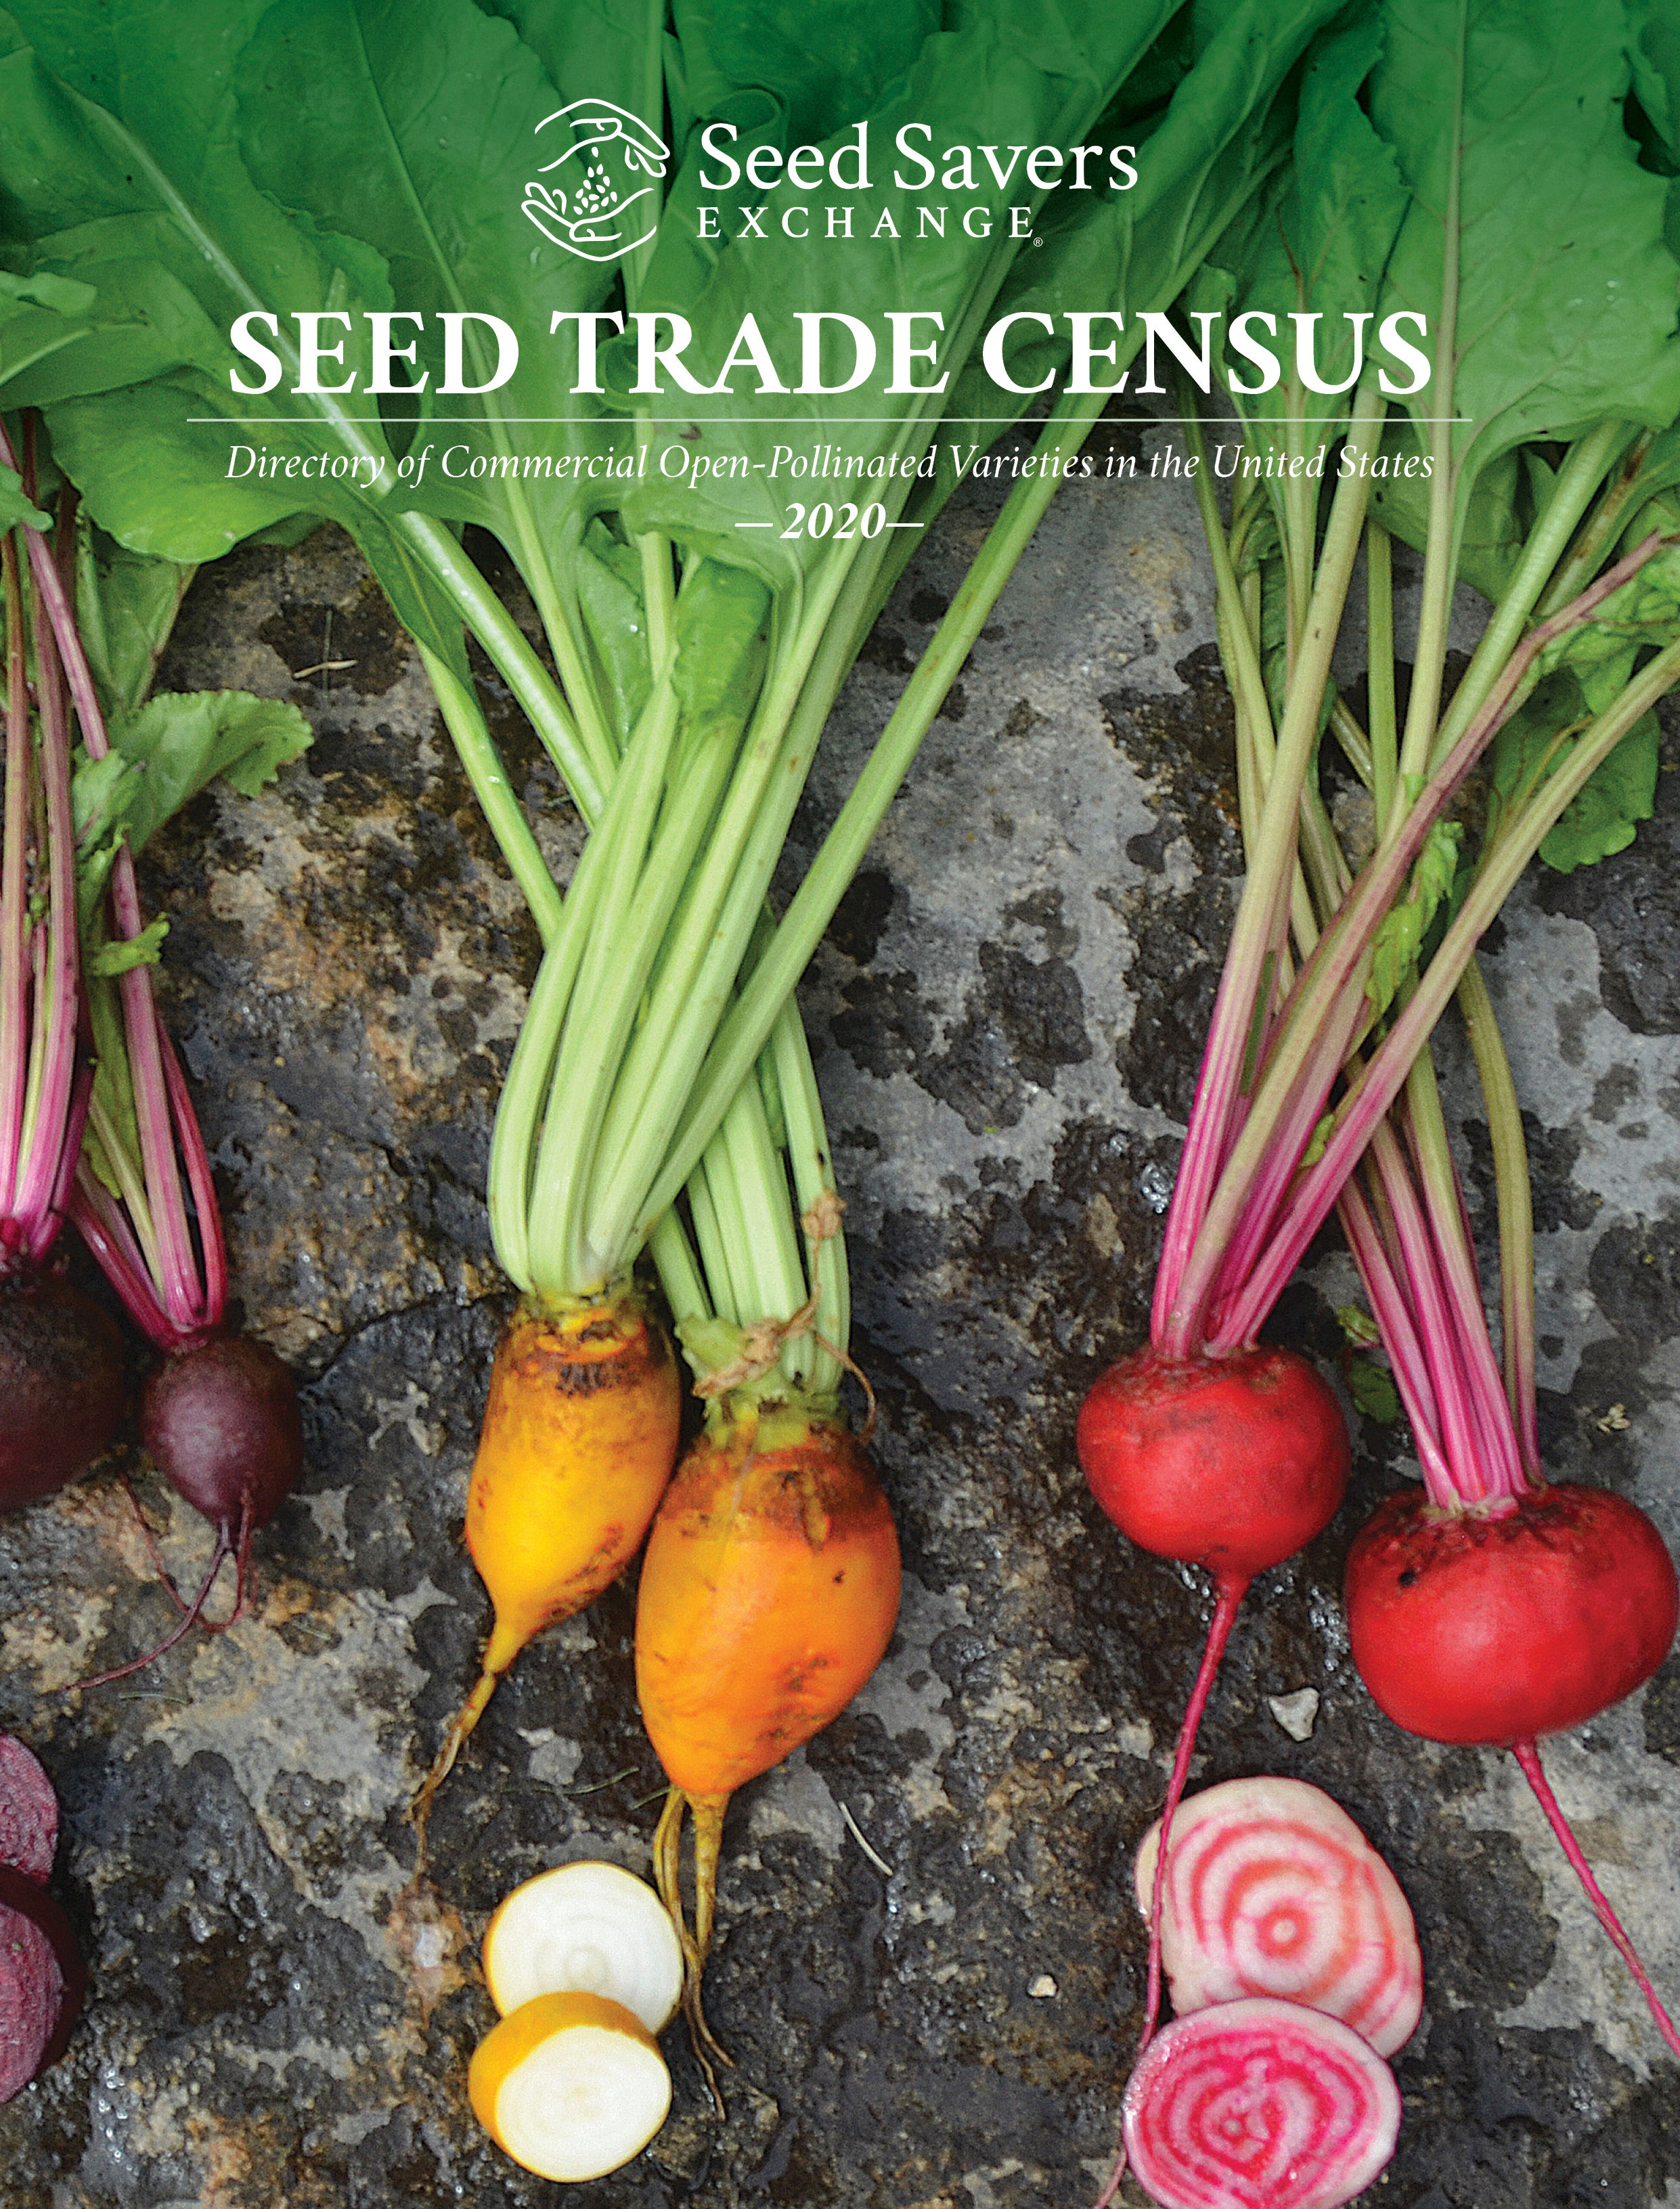 The Seed Trade Census